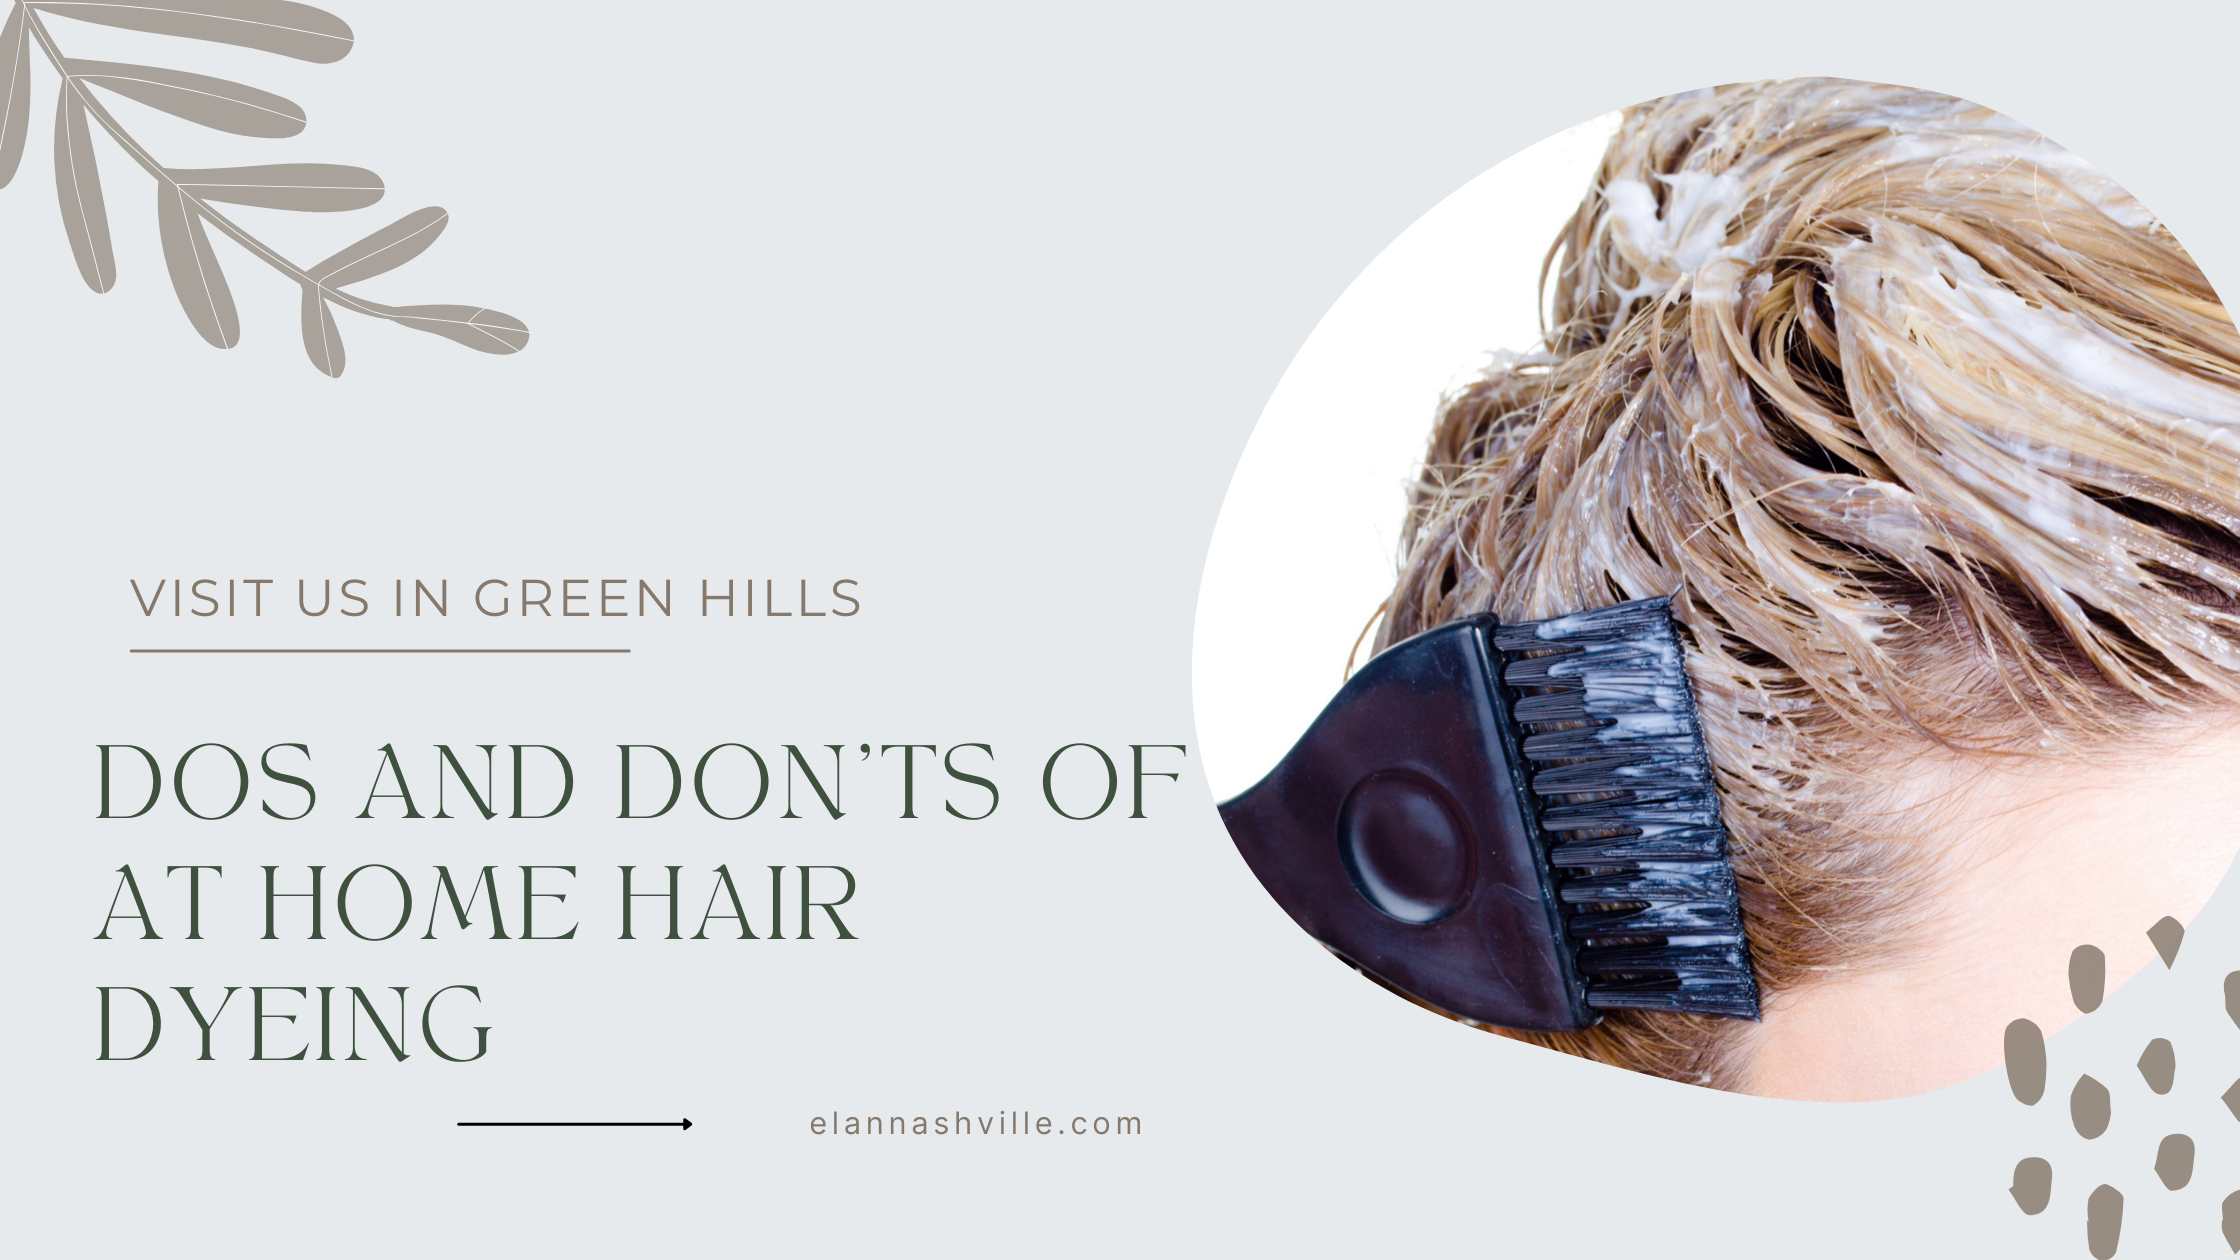 5. "Pastel Sky Blue Hair: The Dos and Don'ts of Dyeing Your Hair This Color" - wide 4